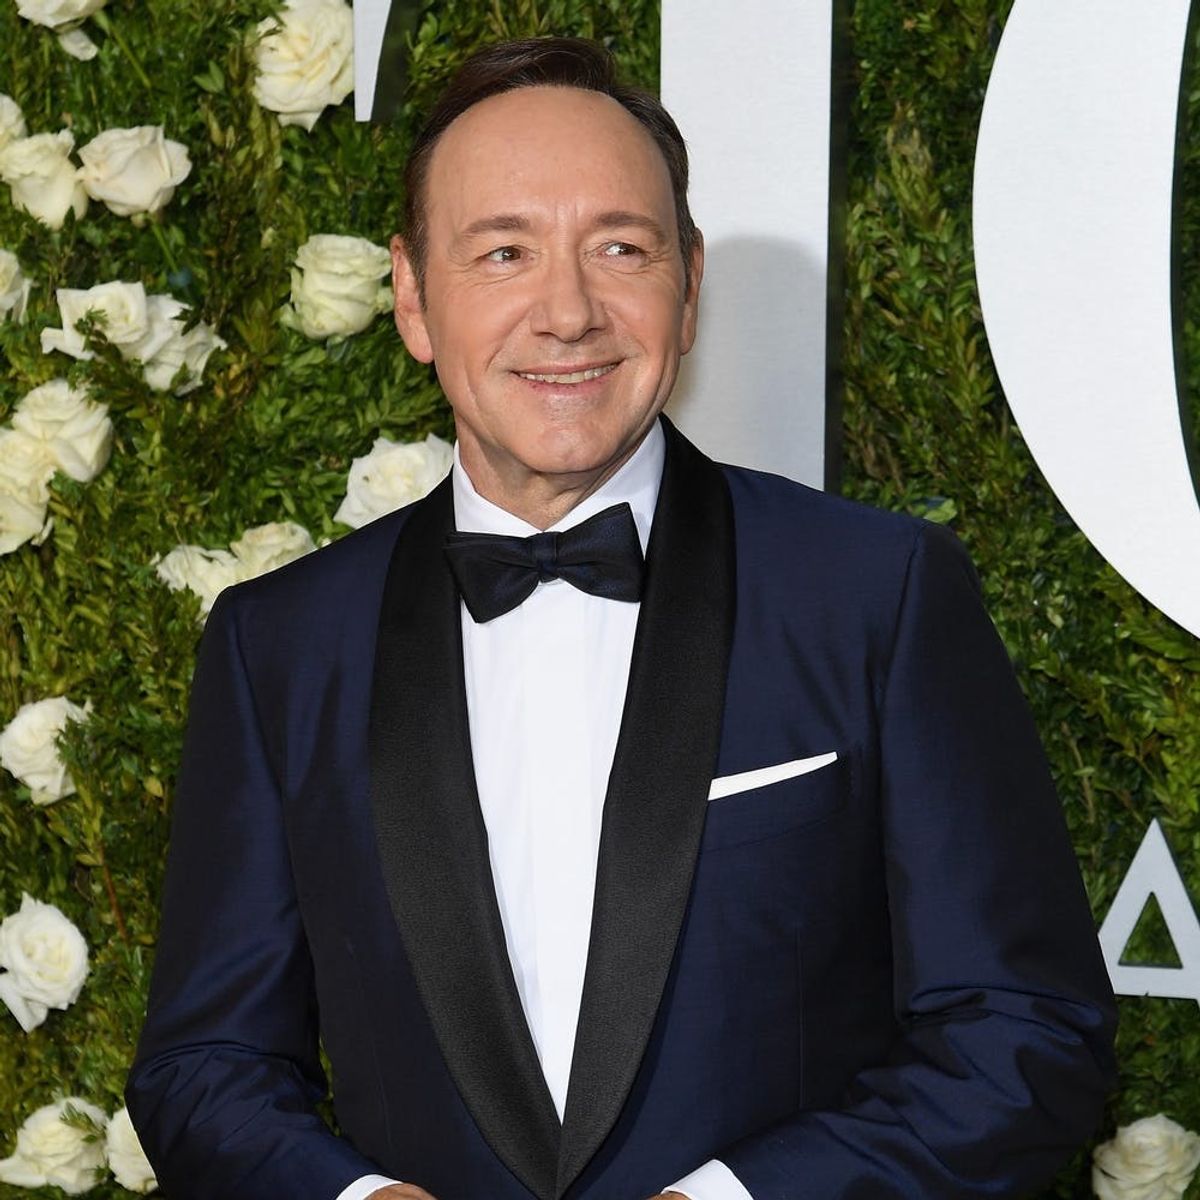 WHOA! Netflix Has Cancelled “House of Cards” Following Sexual Misconduct Allegations Against Star Kevin Spacey